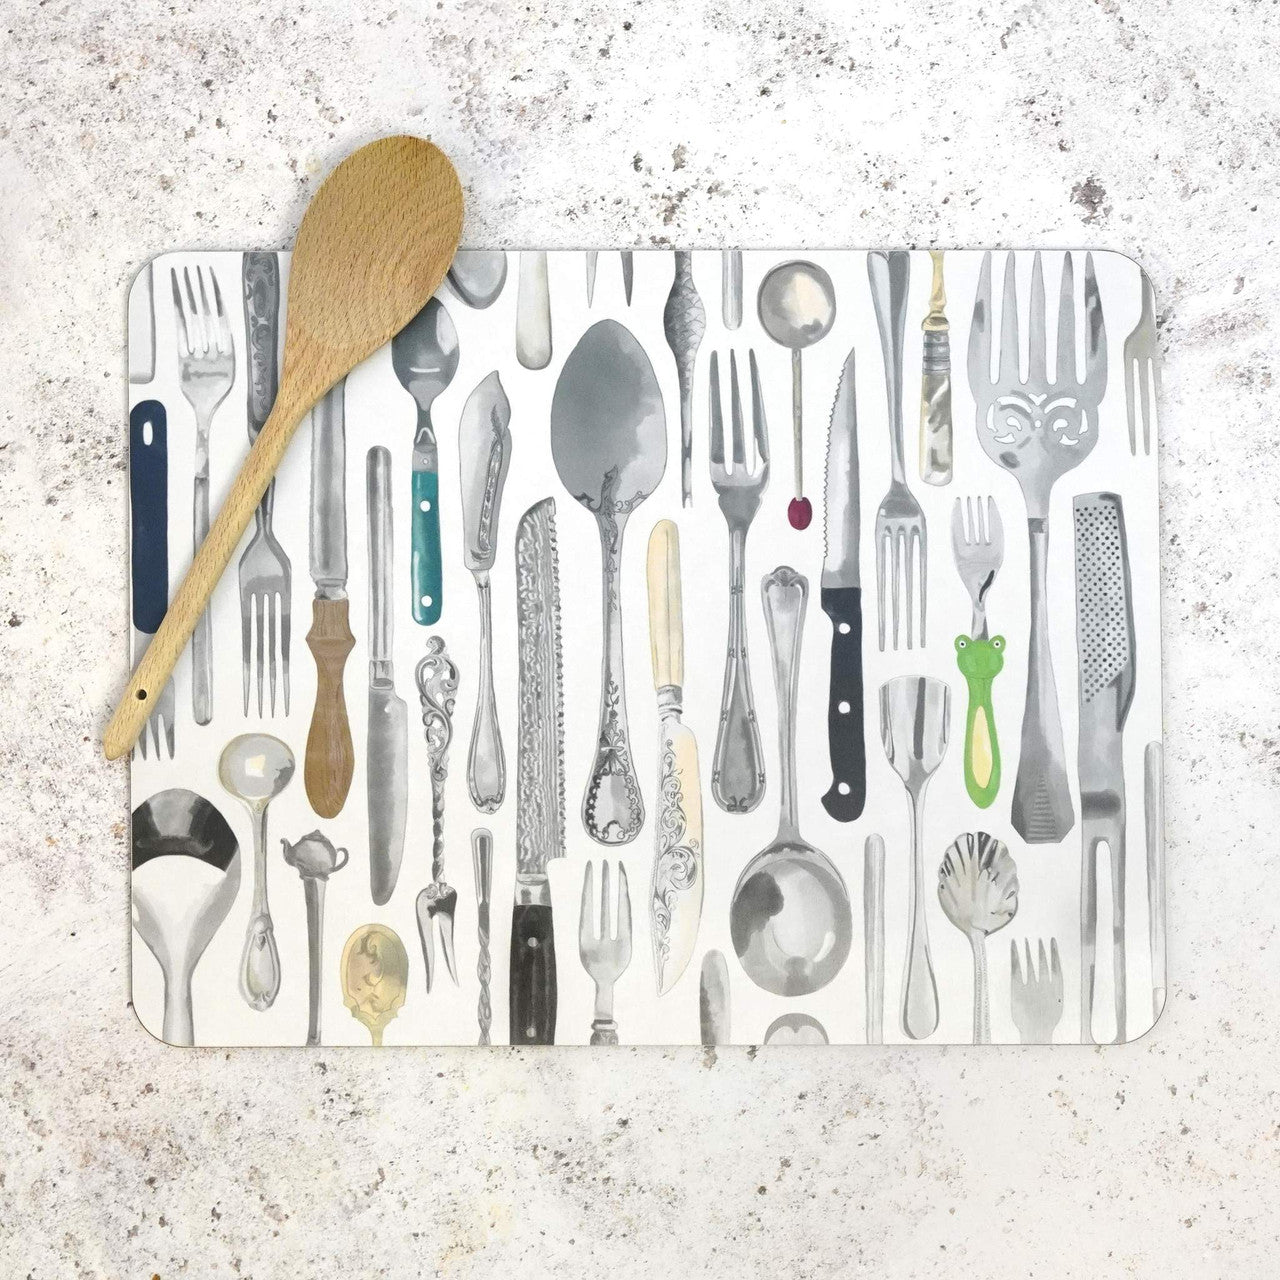 Cutlery Table Mat for Pots and Pans by Corinne Alexander.